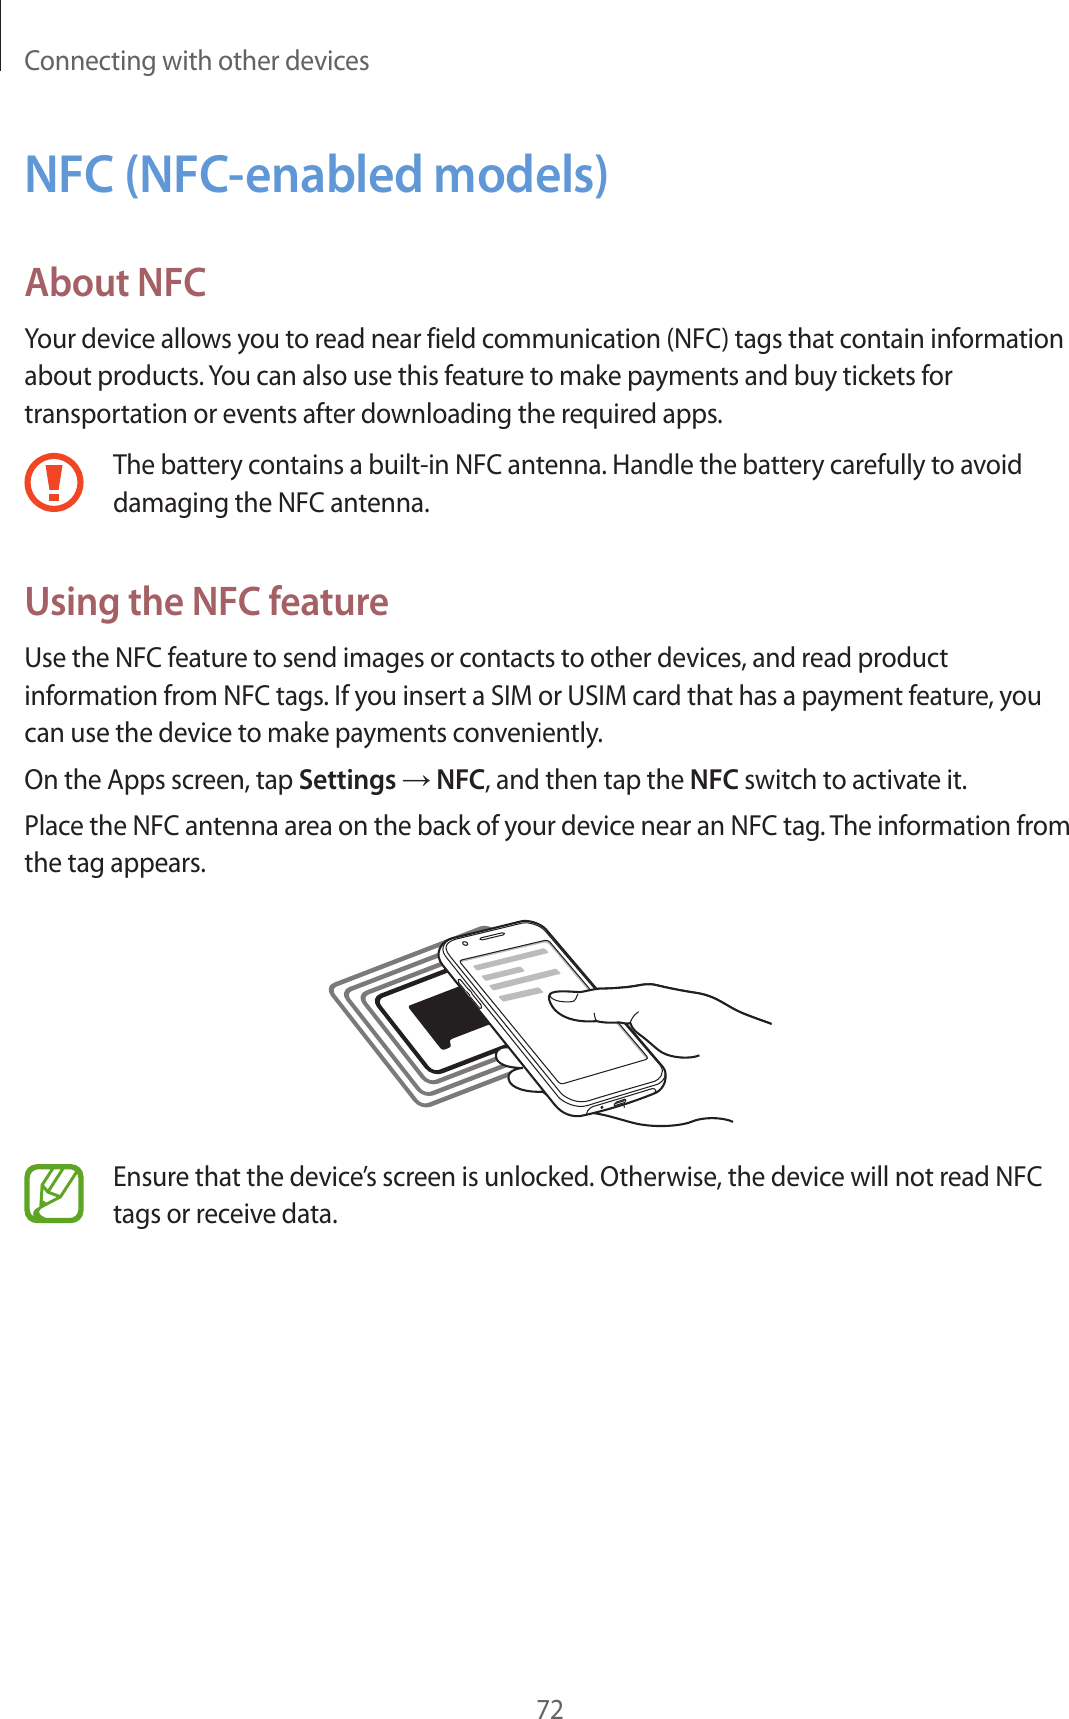 Connecting with other devices72NFC (NFC-enabled models)About NFCYour device allows you to read near field communication (NFC) tags that contain information about products. You can also use this feature to make payments and buy tickets for transportation or events after downloading the required apps.The battery contains a built-in NFC antenna. Handle the battery carefully to avoid damaging the NFC antenna.Using the NFC featureUse the NFC feature to send images or contacts to other devices, and read product information from NFC tags. If you insert a SIM or USIM card that has a payment feature, you can use the device to make payments conveniently.On the Apps screen, tap Settings → NFC, and then tap the NFC switch to activate it.Place the NFC antenna area on the back of your device near an NFC tag. The information from the tag appears.Ensure that the device’s screen is unlocked. Otherwise, the device will not read NFC tags or receive data.